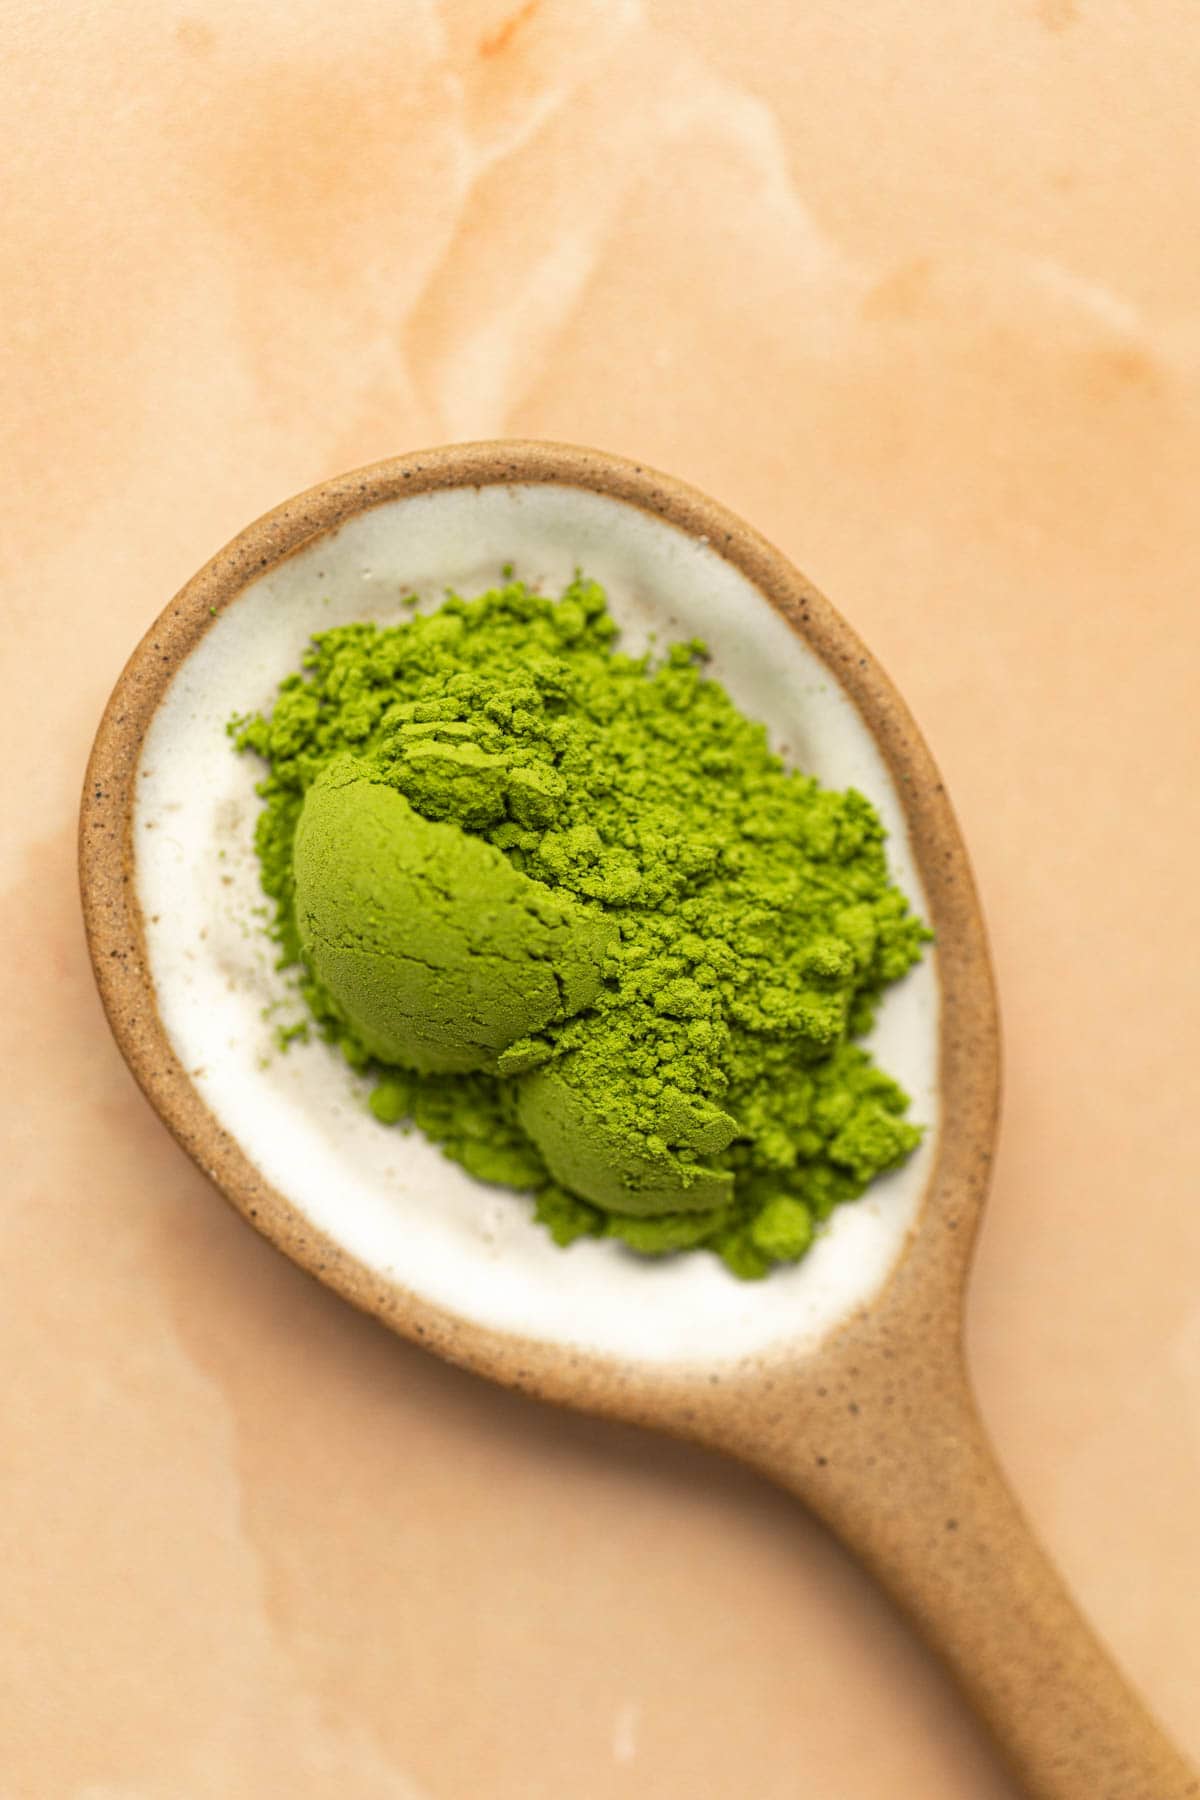 A spoon containing matcha powder.